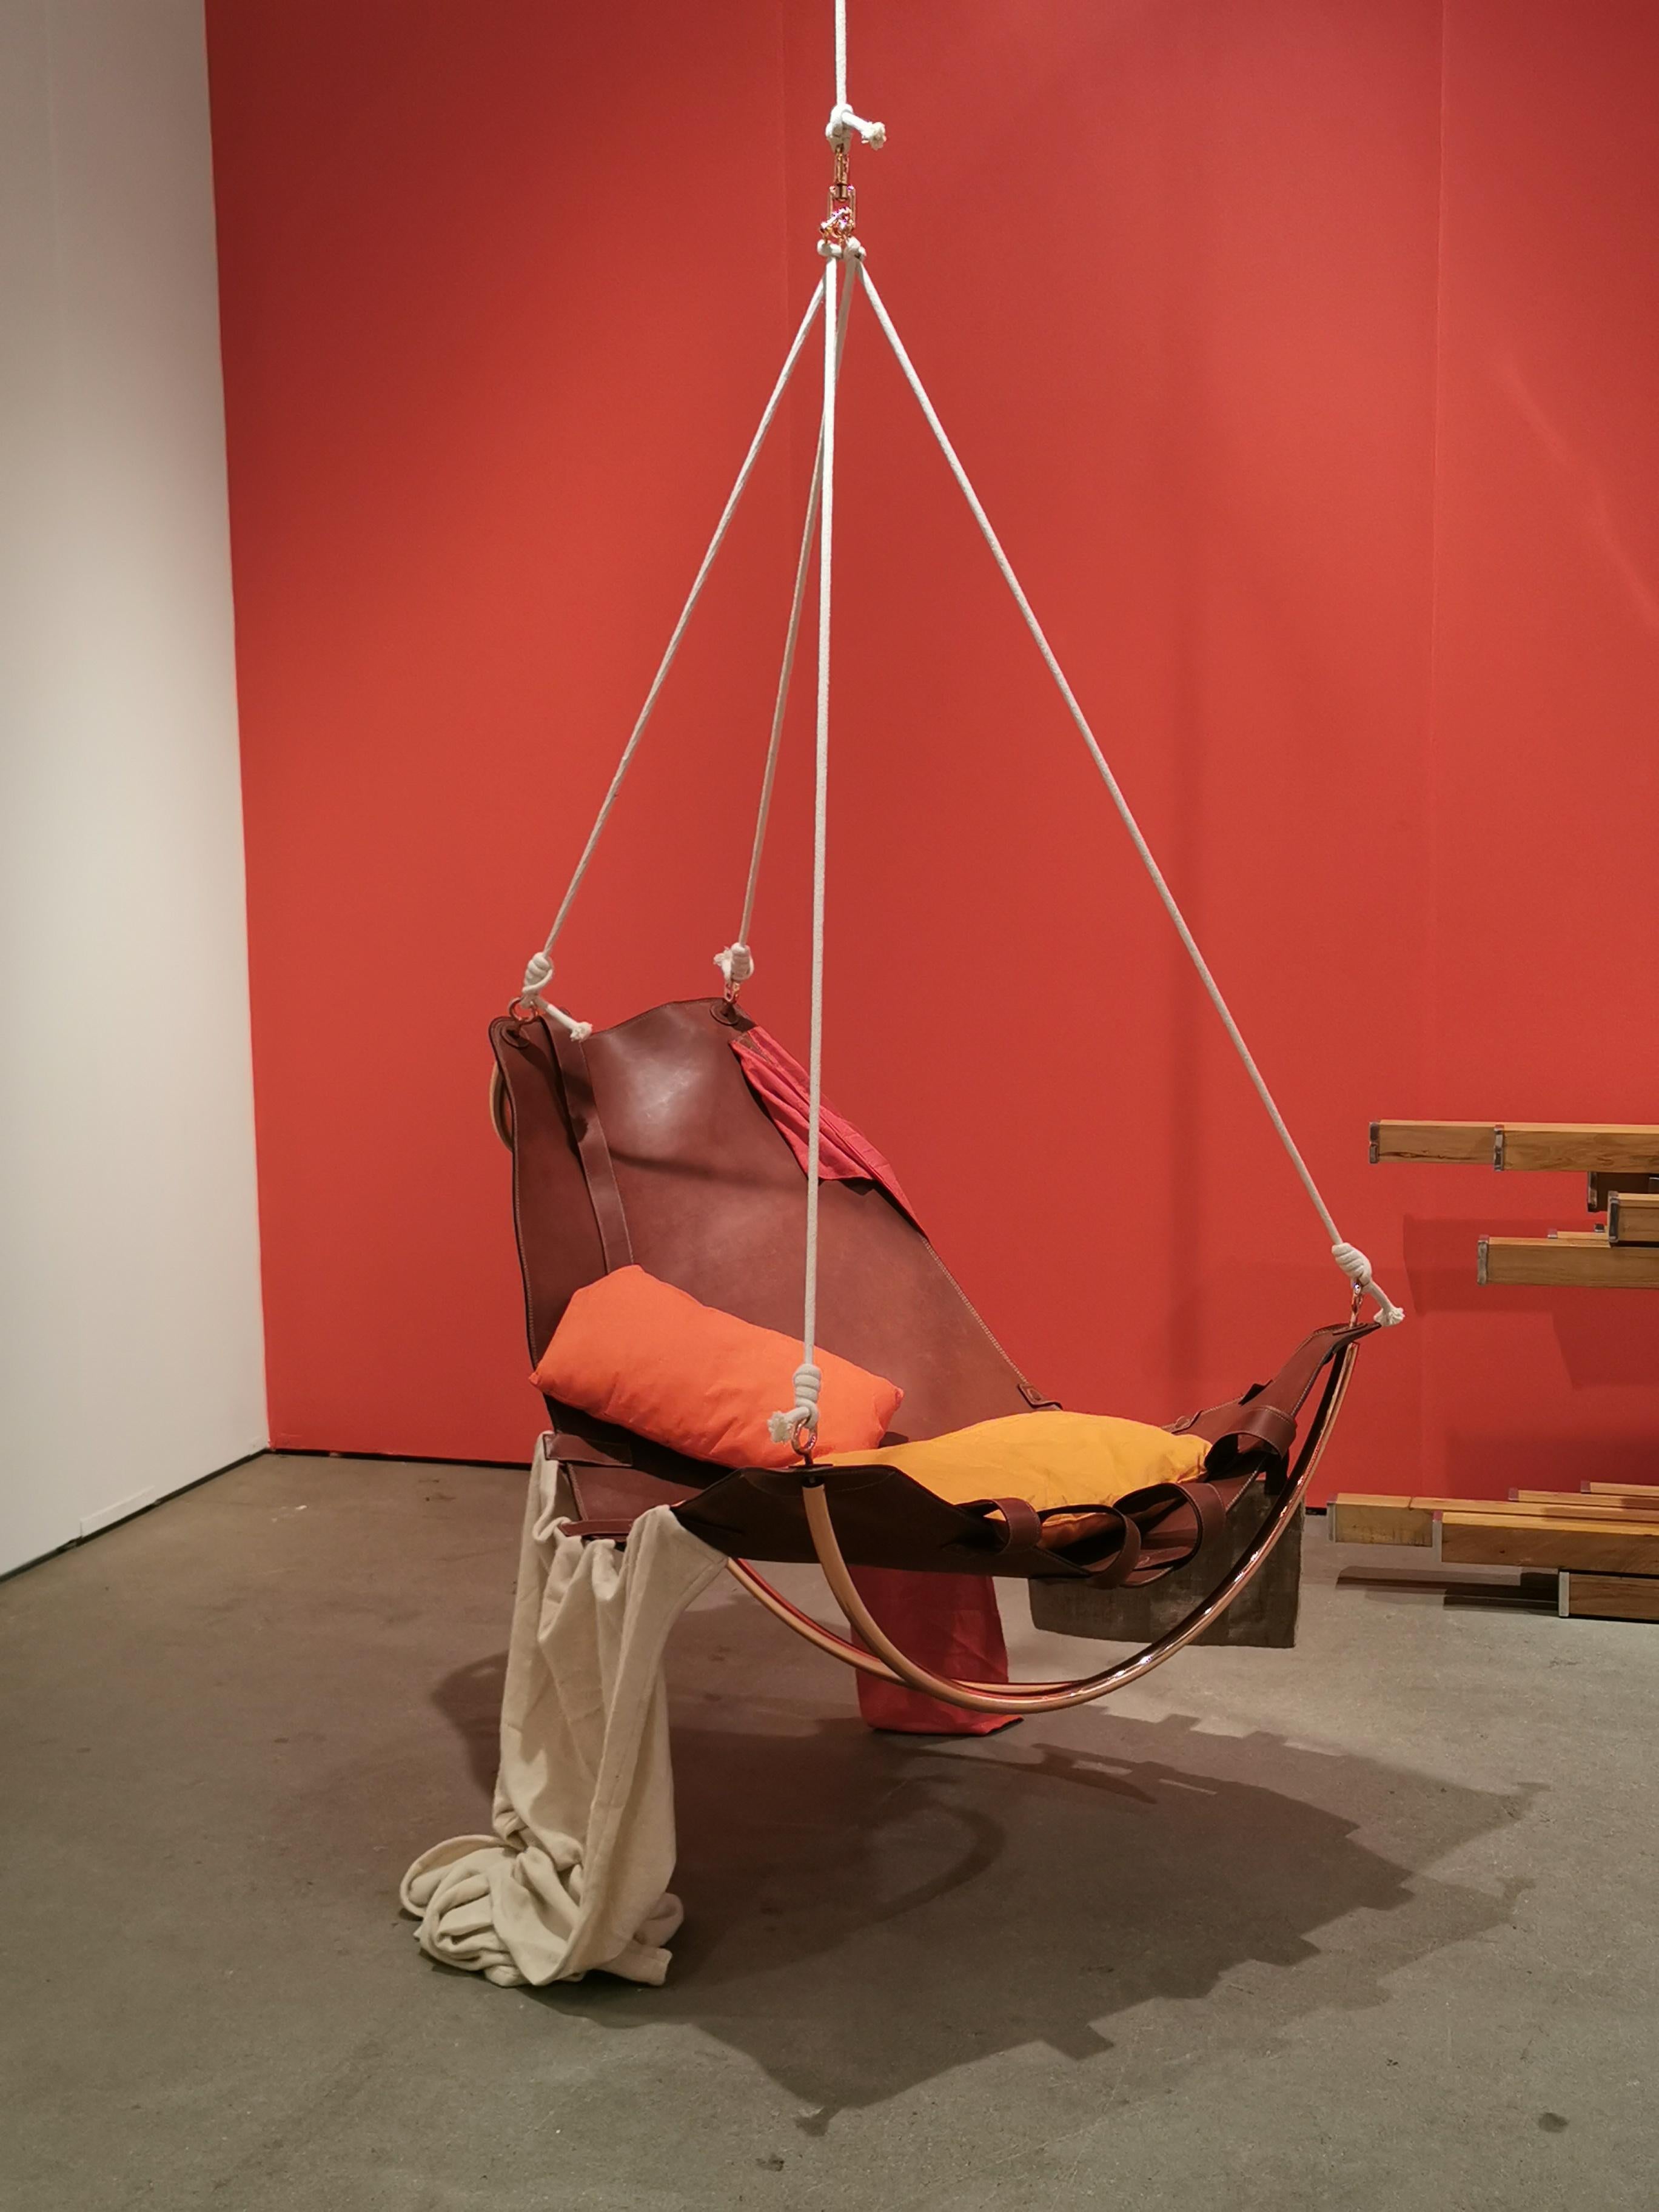 Supra chair by Mameluca
Material:Copper plated steel, leather, Assorted fabrics
Dimensions: D110x W90 x H90 cm

Hélio Oiticica’s Parangolés inspired the creation of a rocking chair Supra (Super). Fabrics, cloths, plastics and other materials